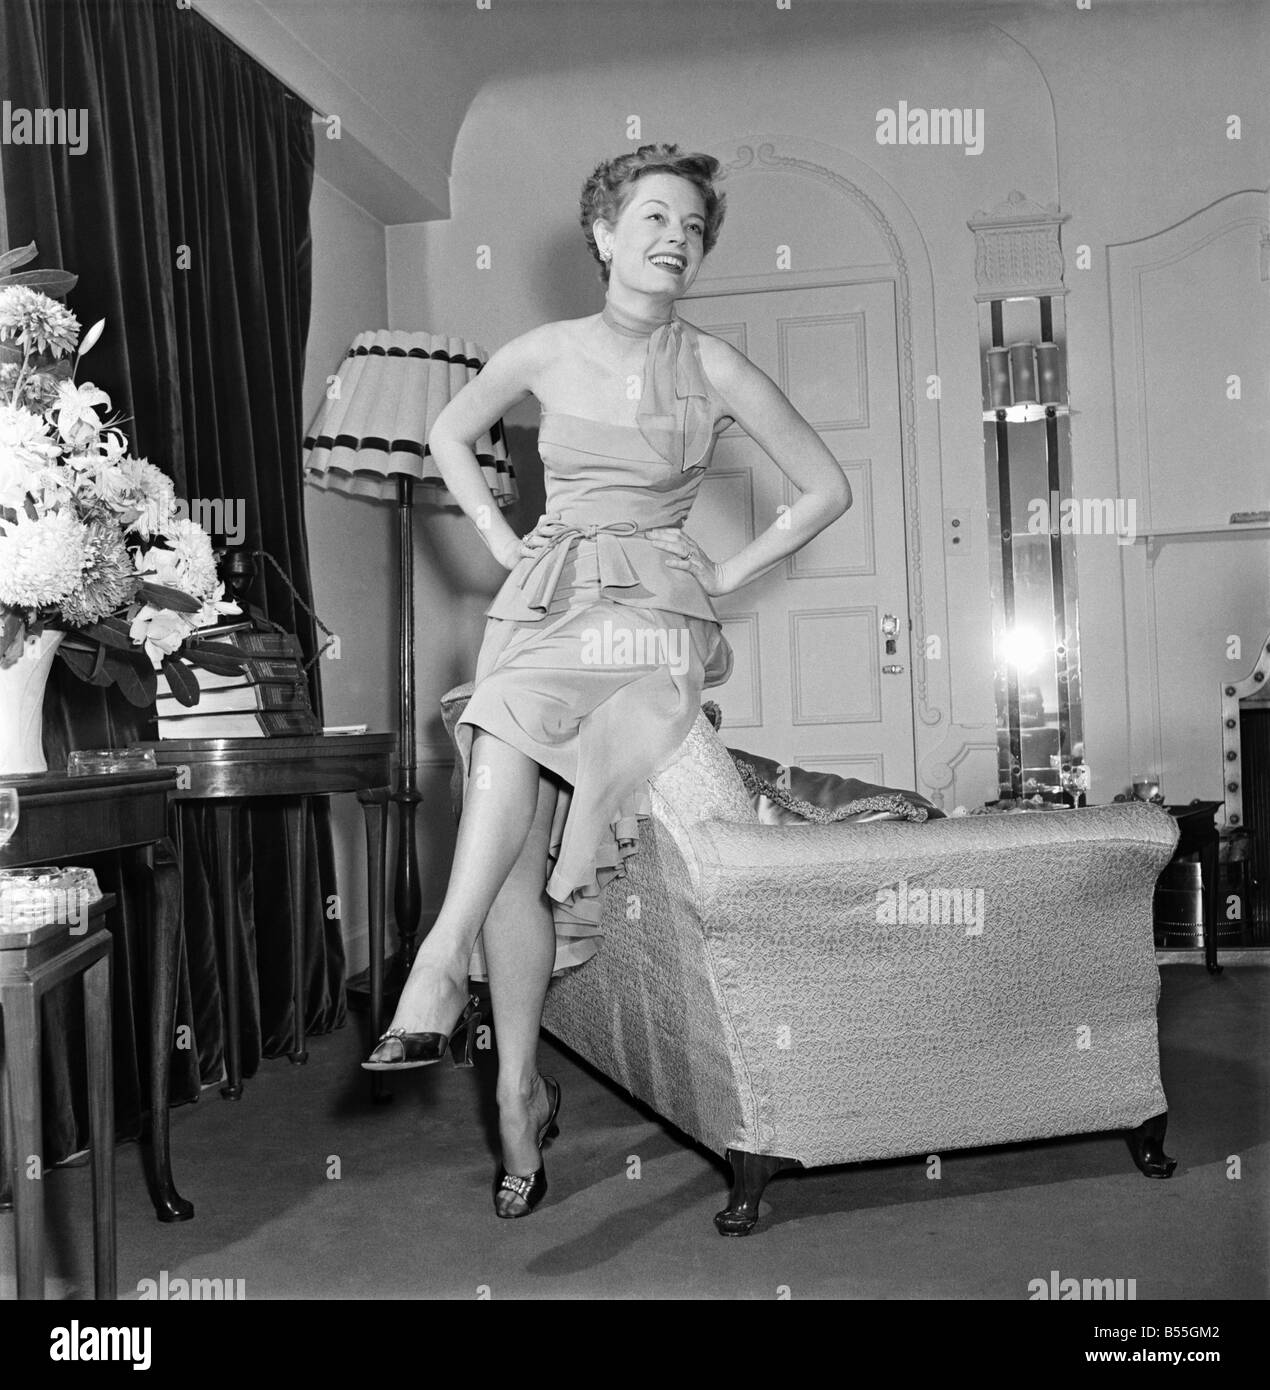 American film actress Alexis Smith who arrived in London today Friday. She is here to make a new British film at Nettlefold studios to be called 'Sleeping Tiger' Alexis were a pale blue dress with chiffon overskirt, black leather shoes with diamond buckle. November 1953 D7088-001 Stock Photo